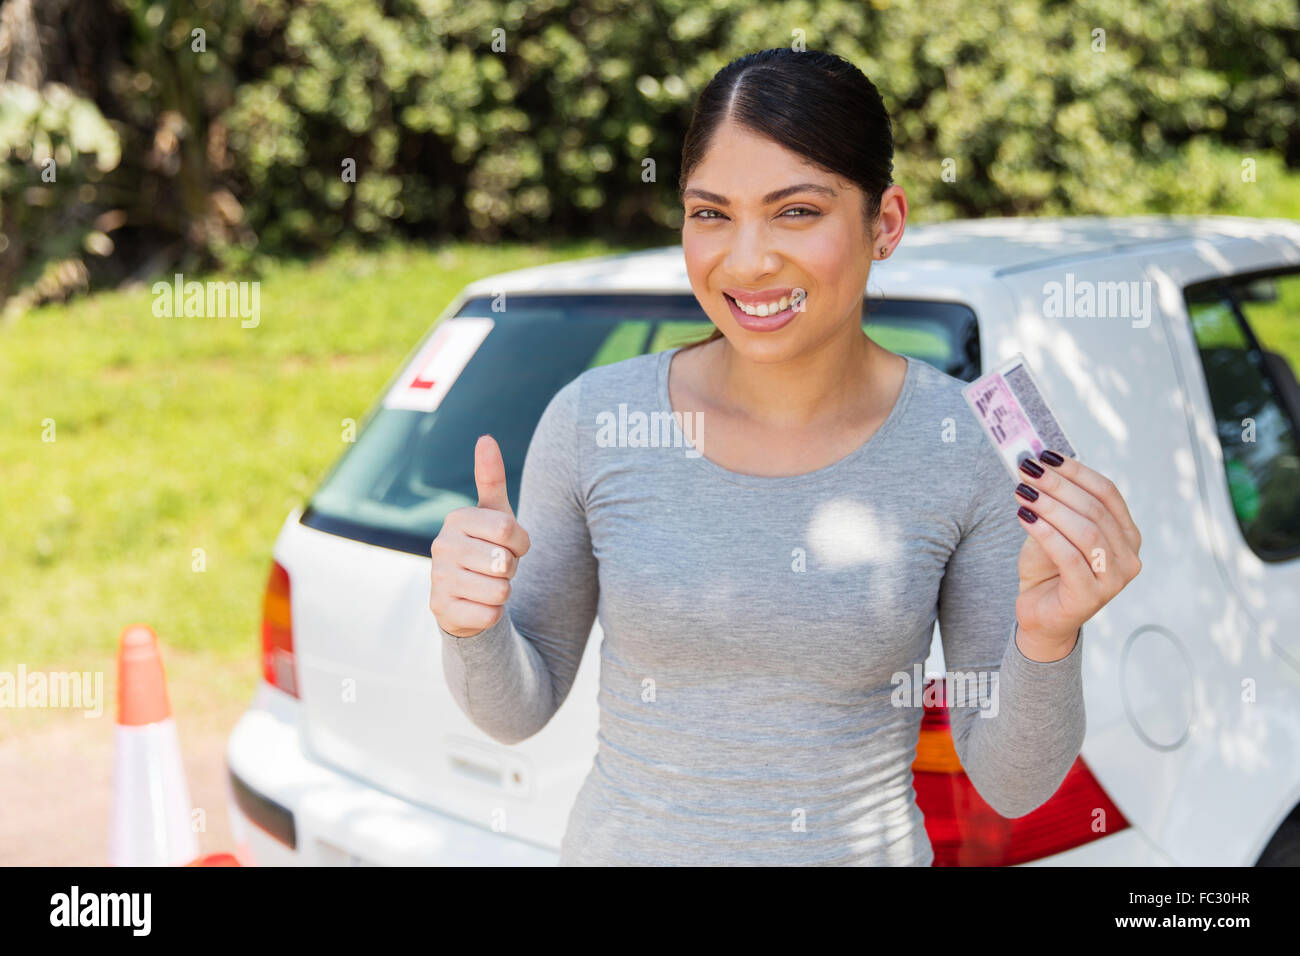 excited young woman showing a driving license she just got Stock Photo